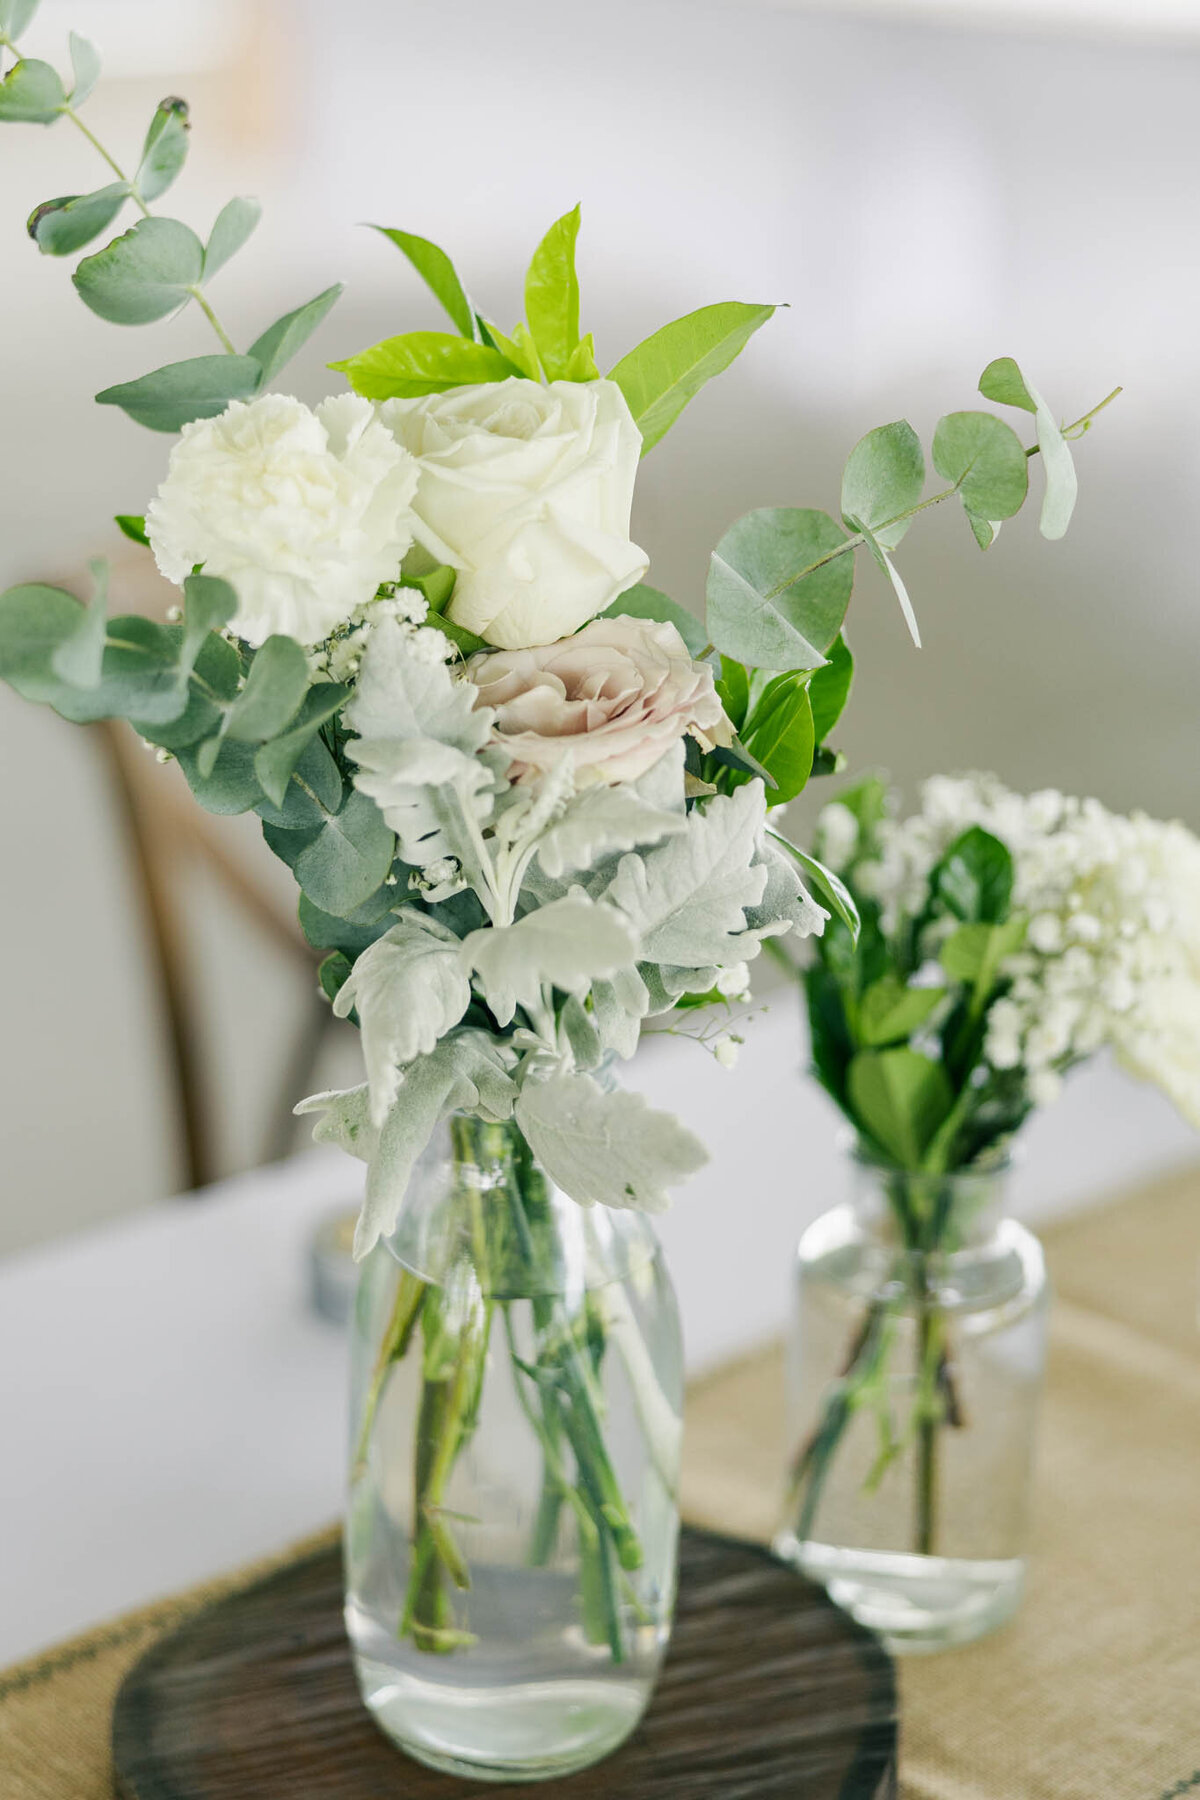 Fresh roses as wedding centrepieces on tables